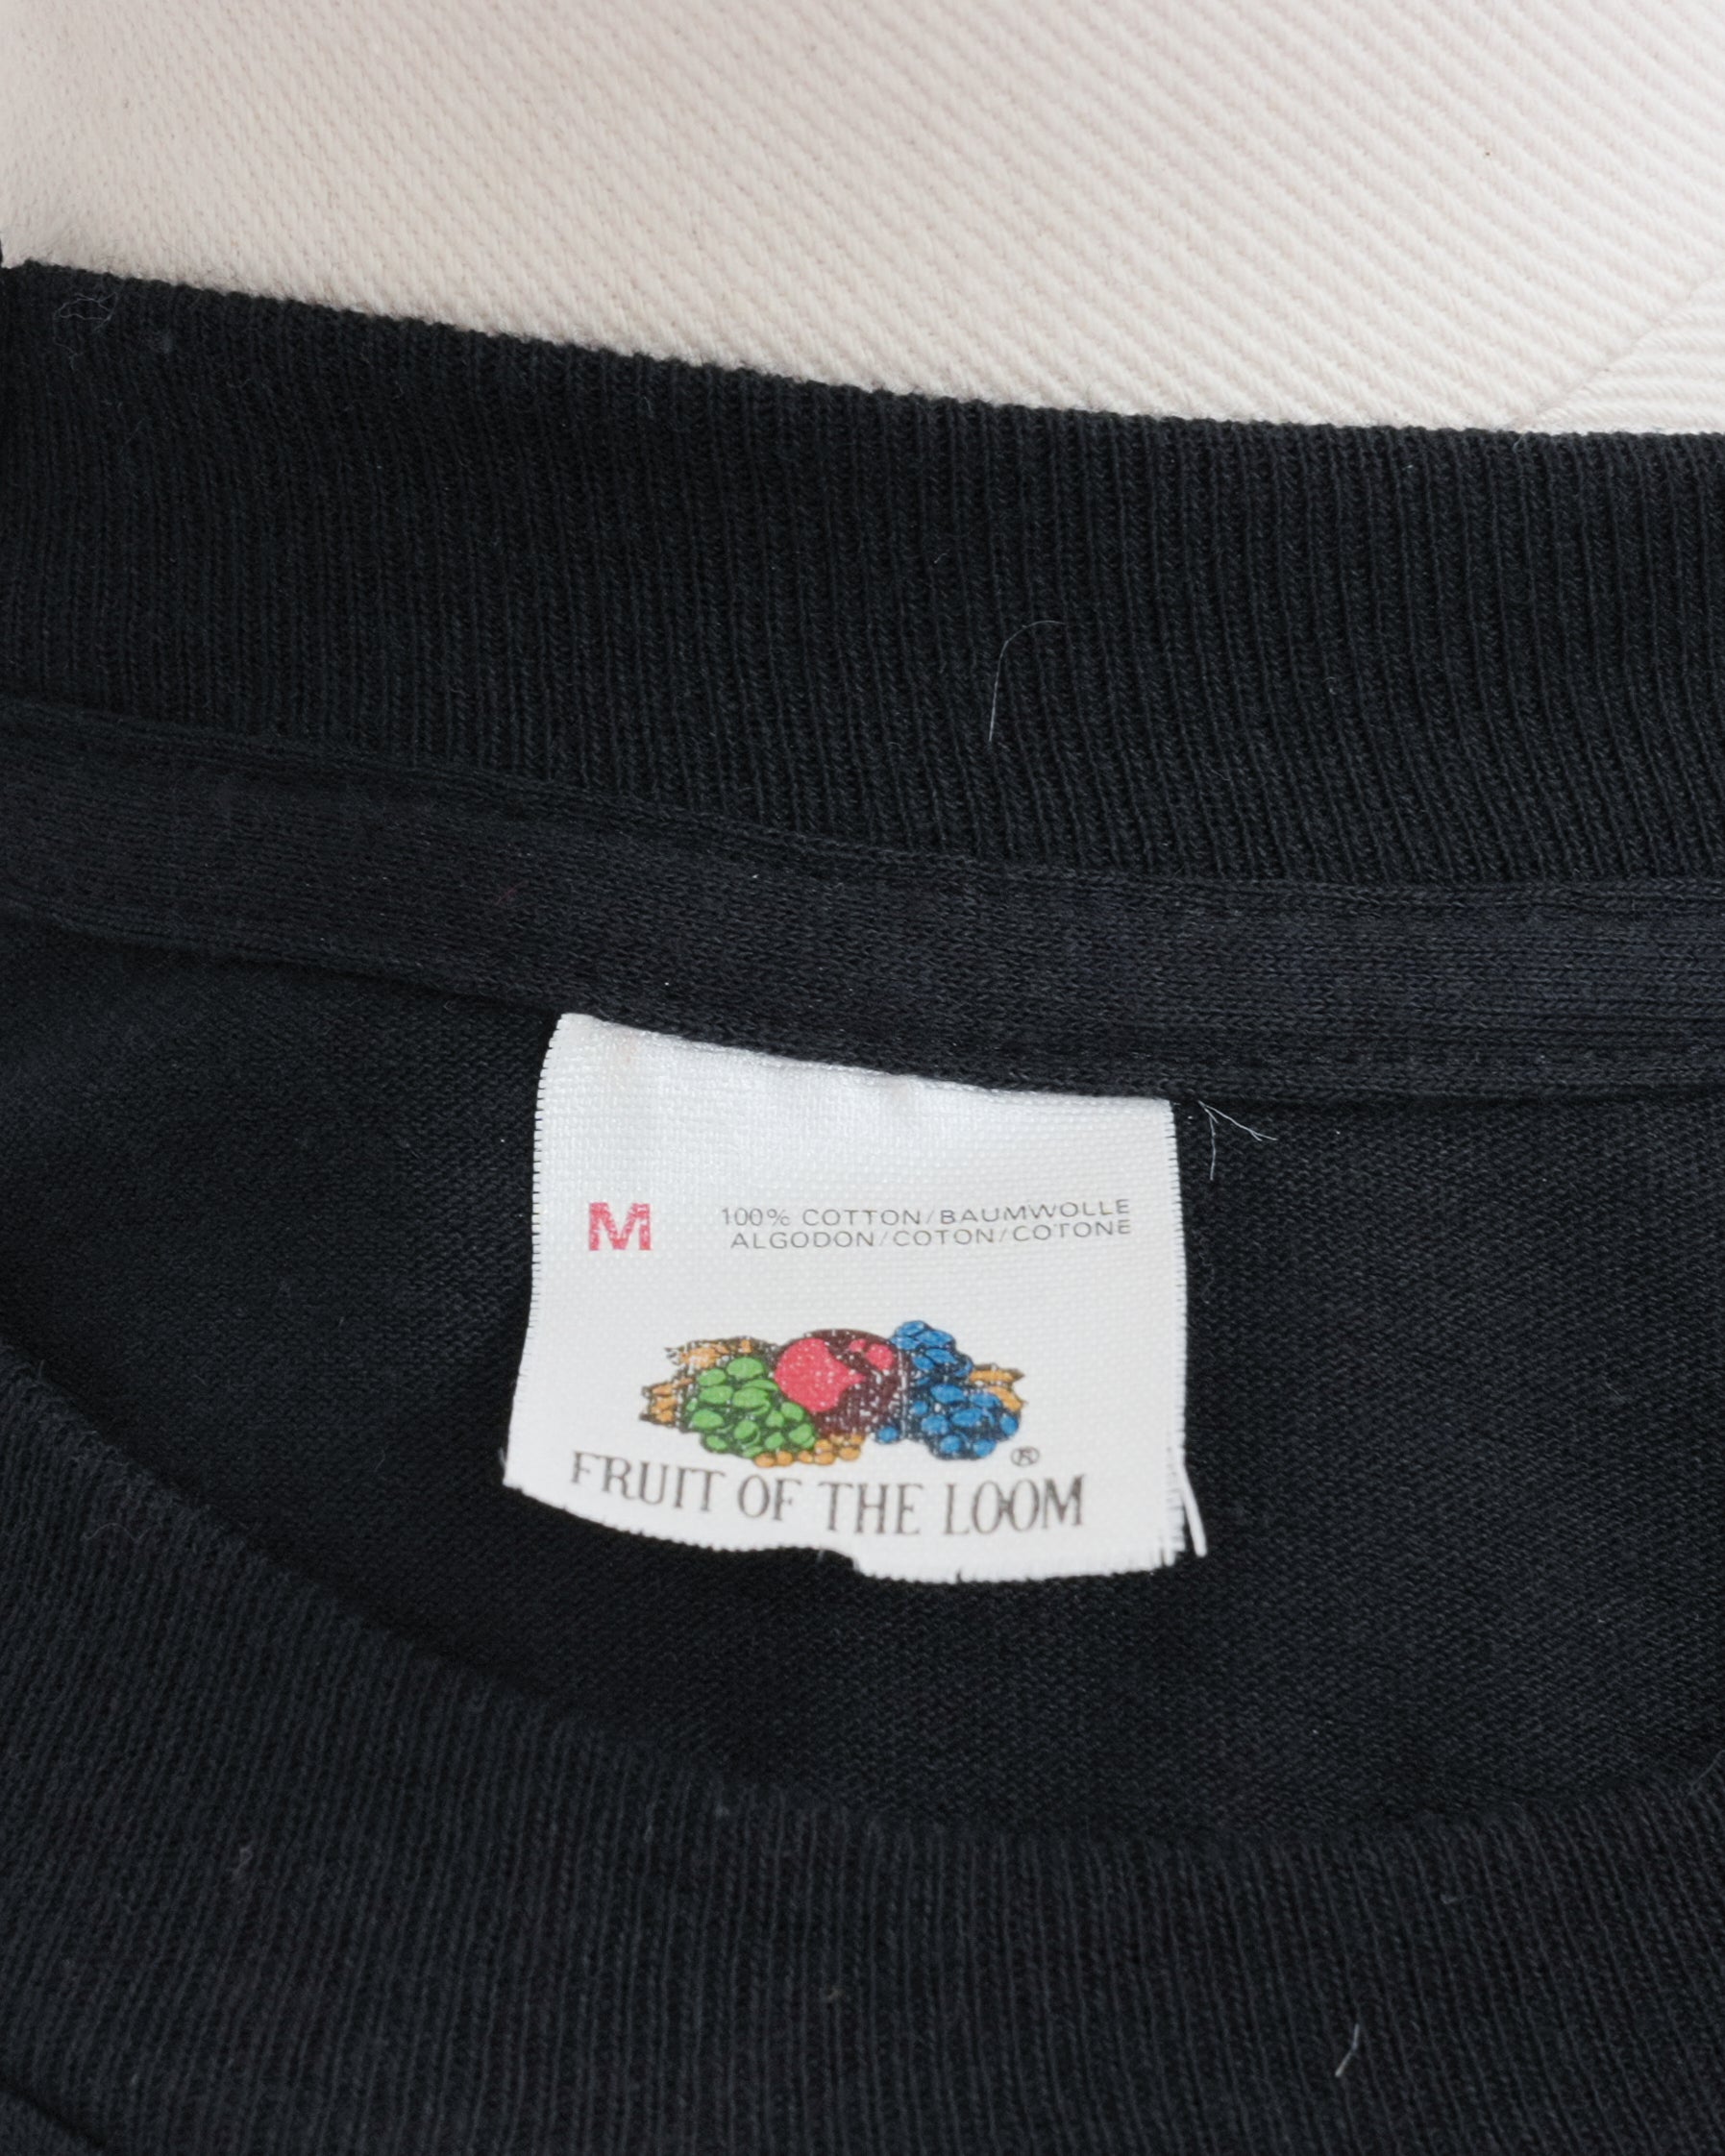 Made in Ireland FRUIT OF THE LOOM T-shirt